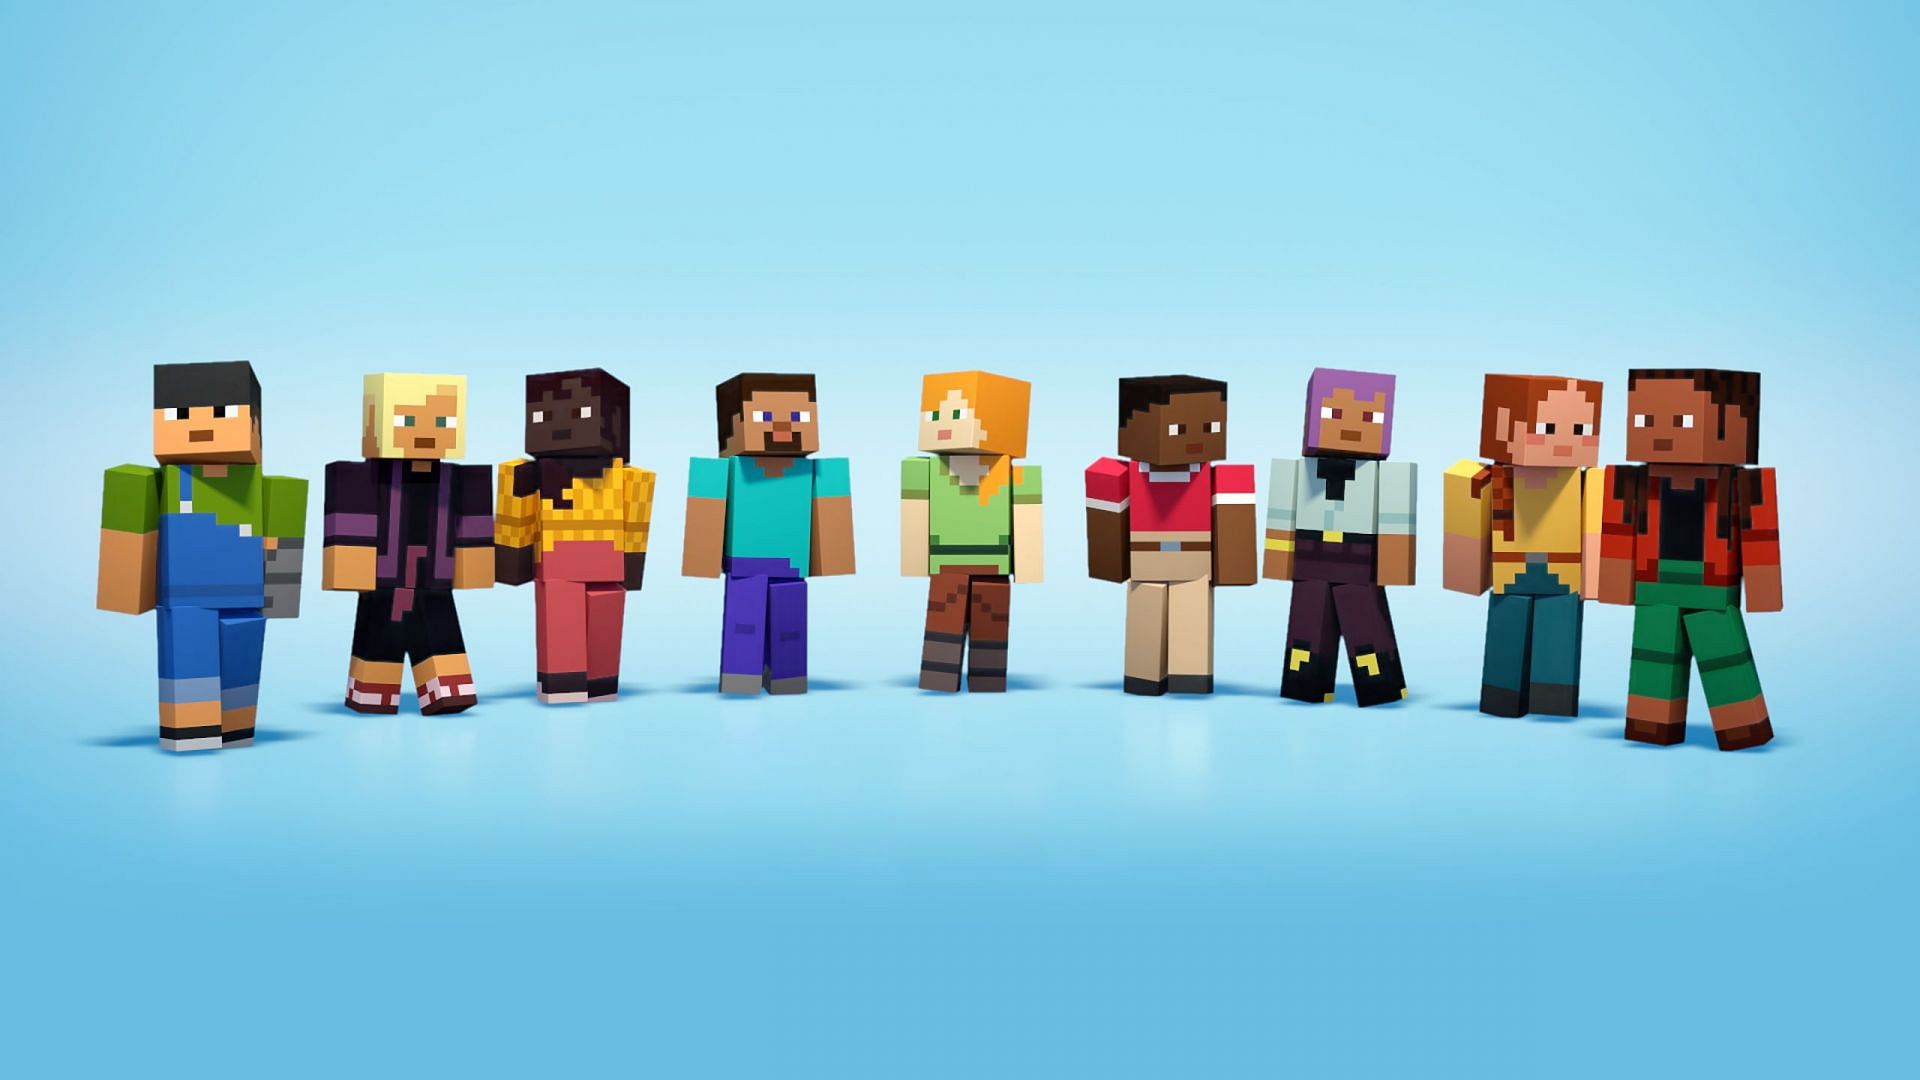 There are nine different characters or skins in Minecraft (Image via Mojang Studios)